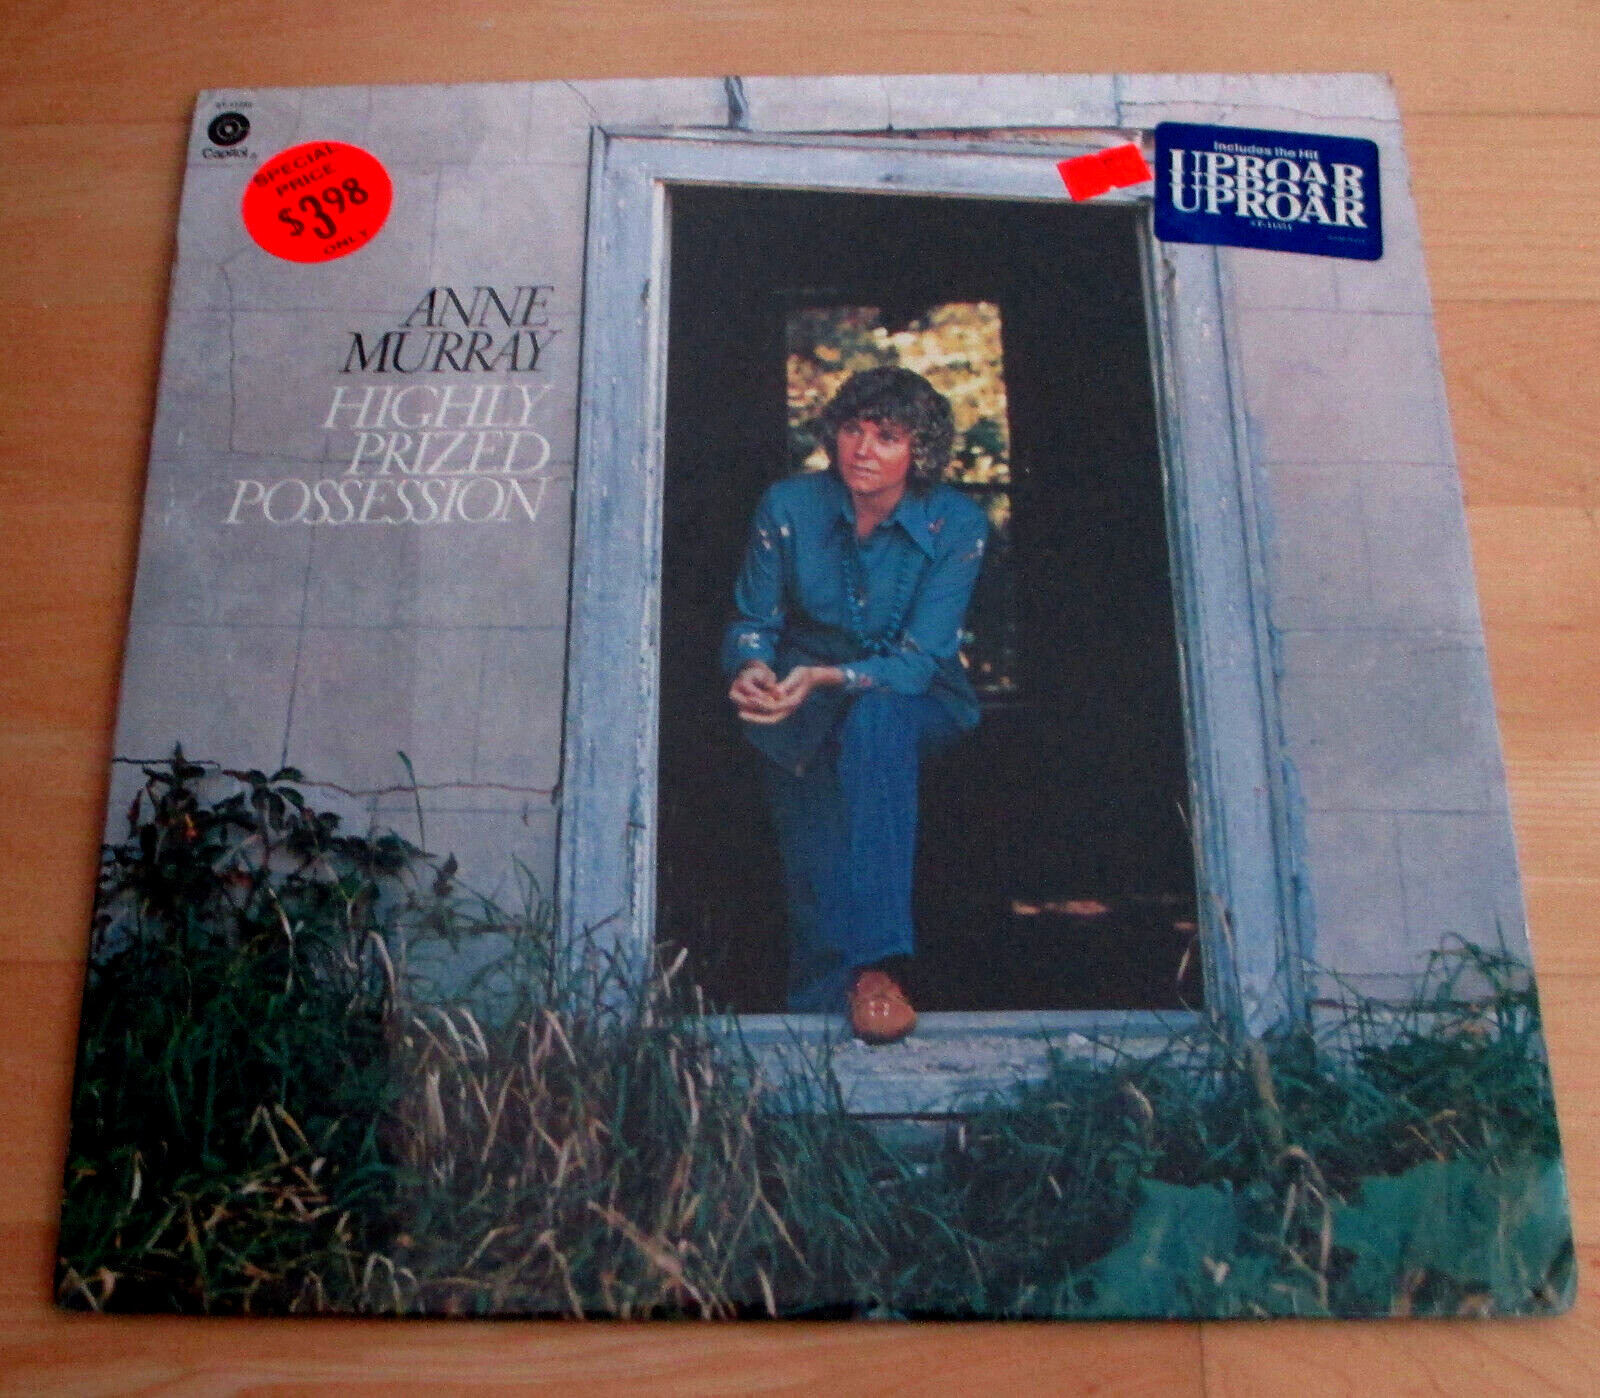 VINTAGE 1974 Anne Murray Highly Prized Possession 33 SEALED Hype ST 11354 LP